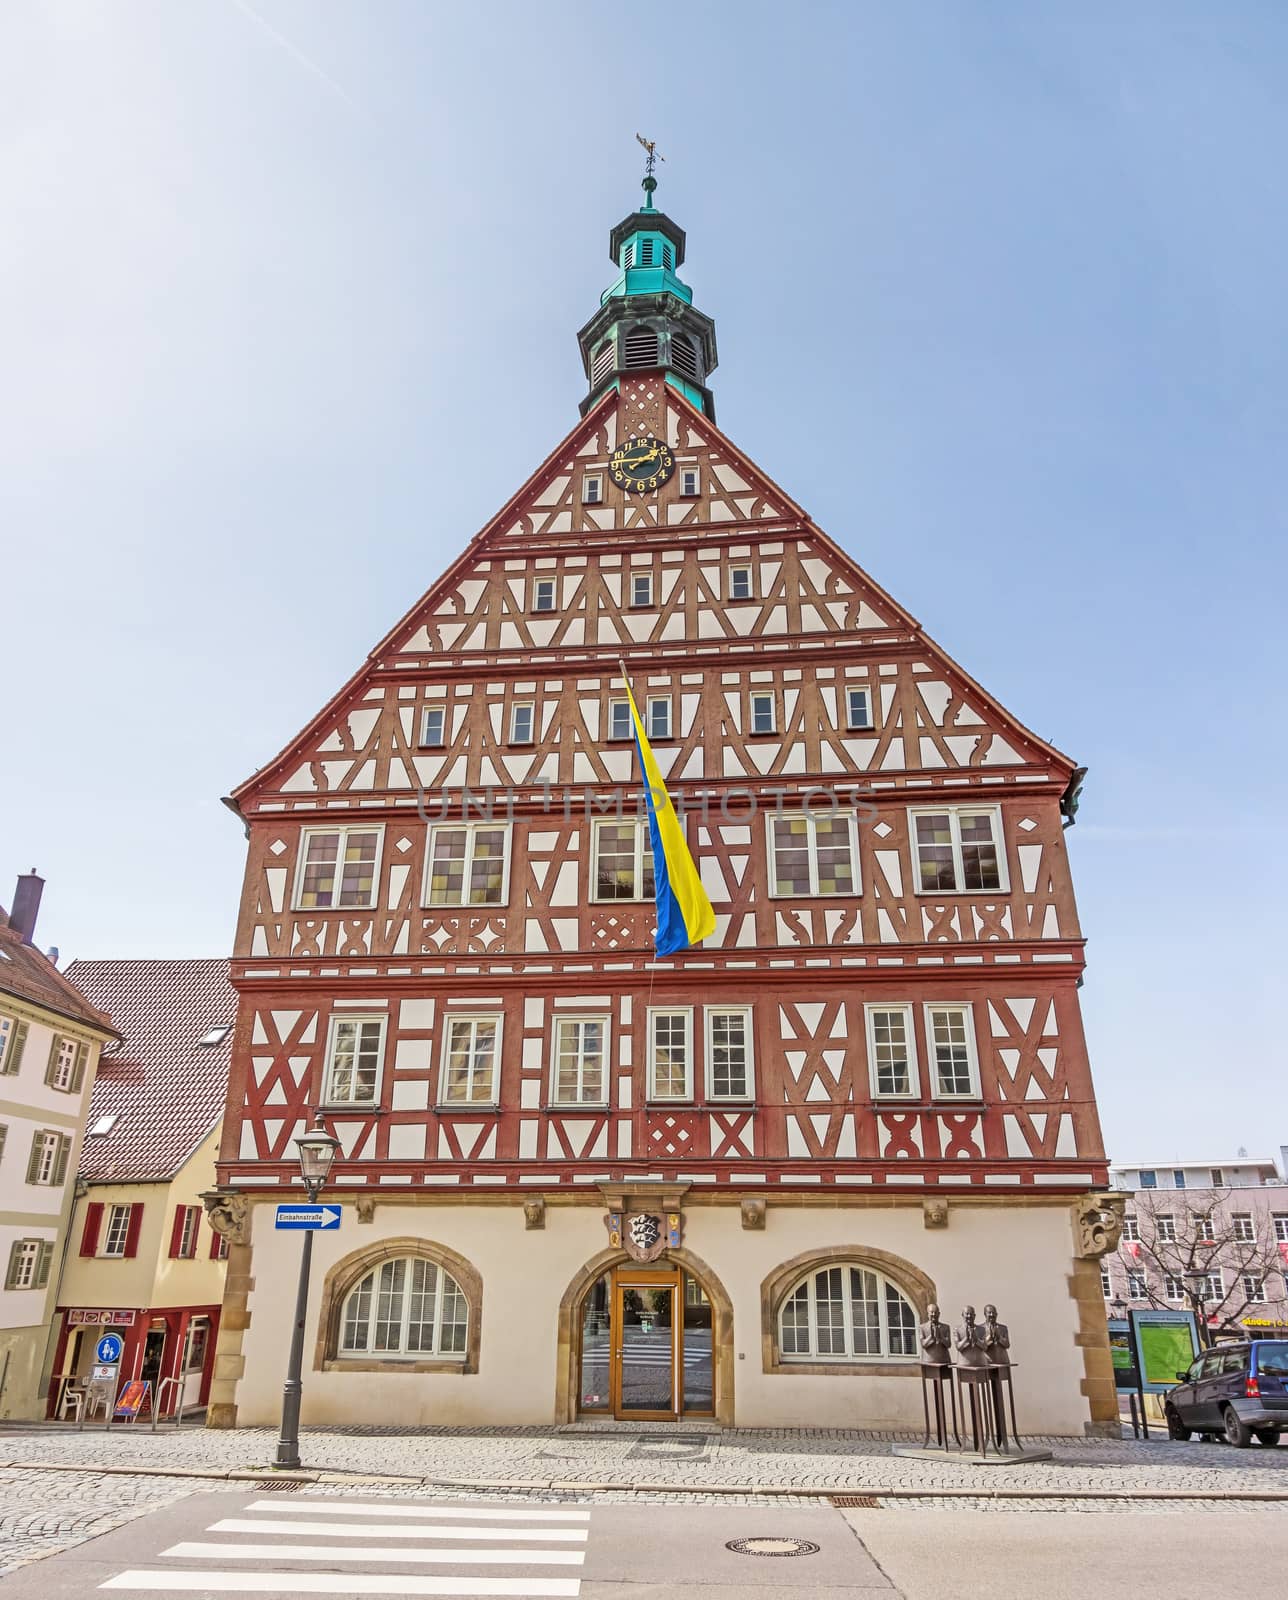 Backnang, Germany - April 3, 2016: City center with historical townhall and half-timbered houses